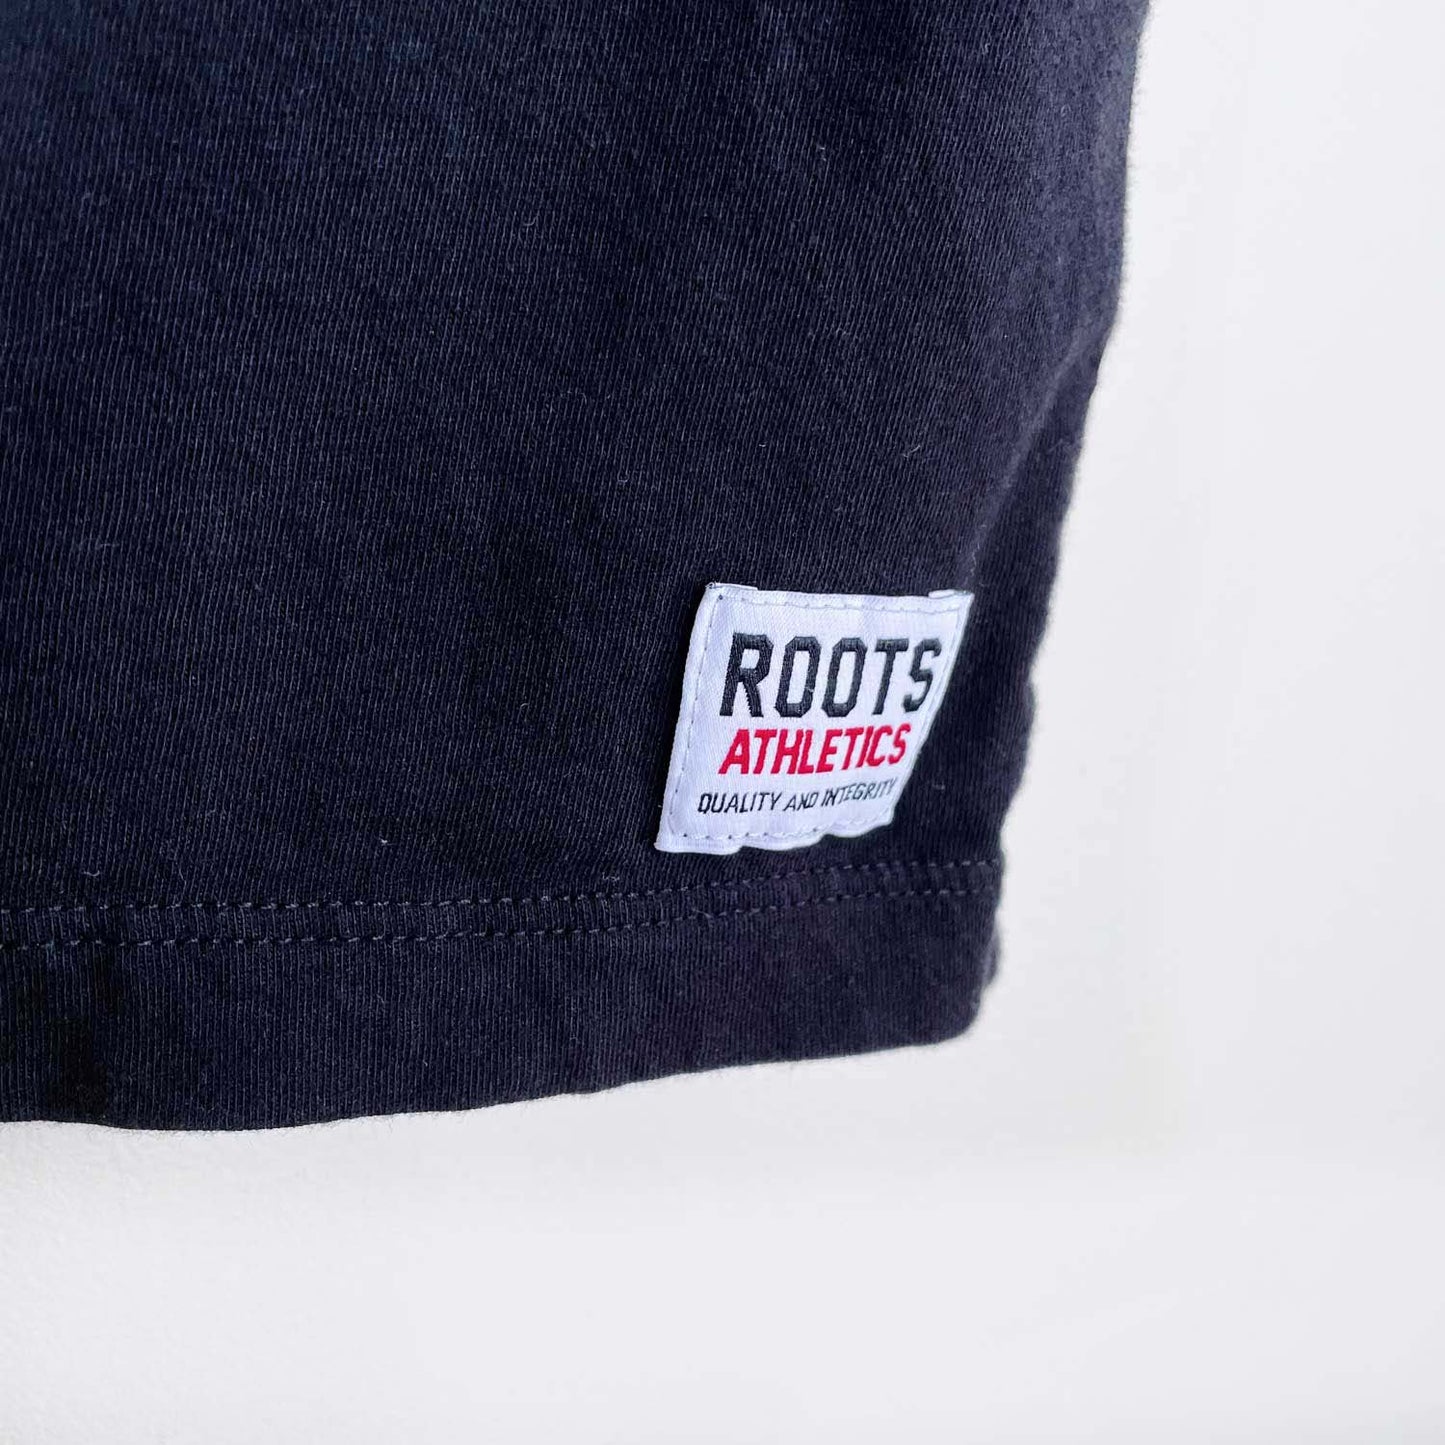 roots original cooper beaver tee - size small